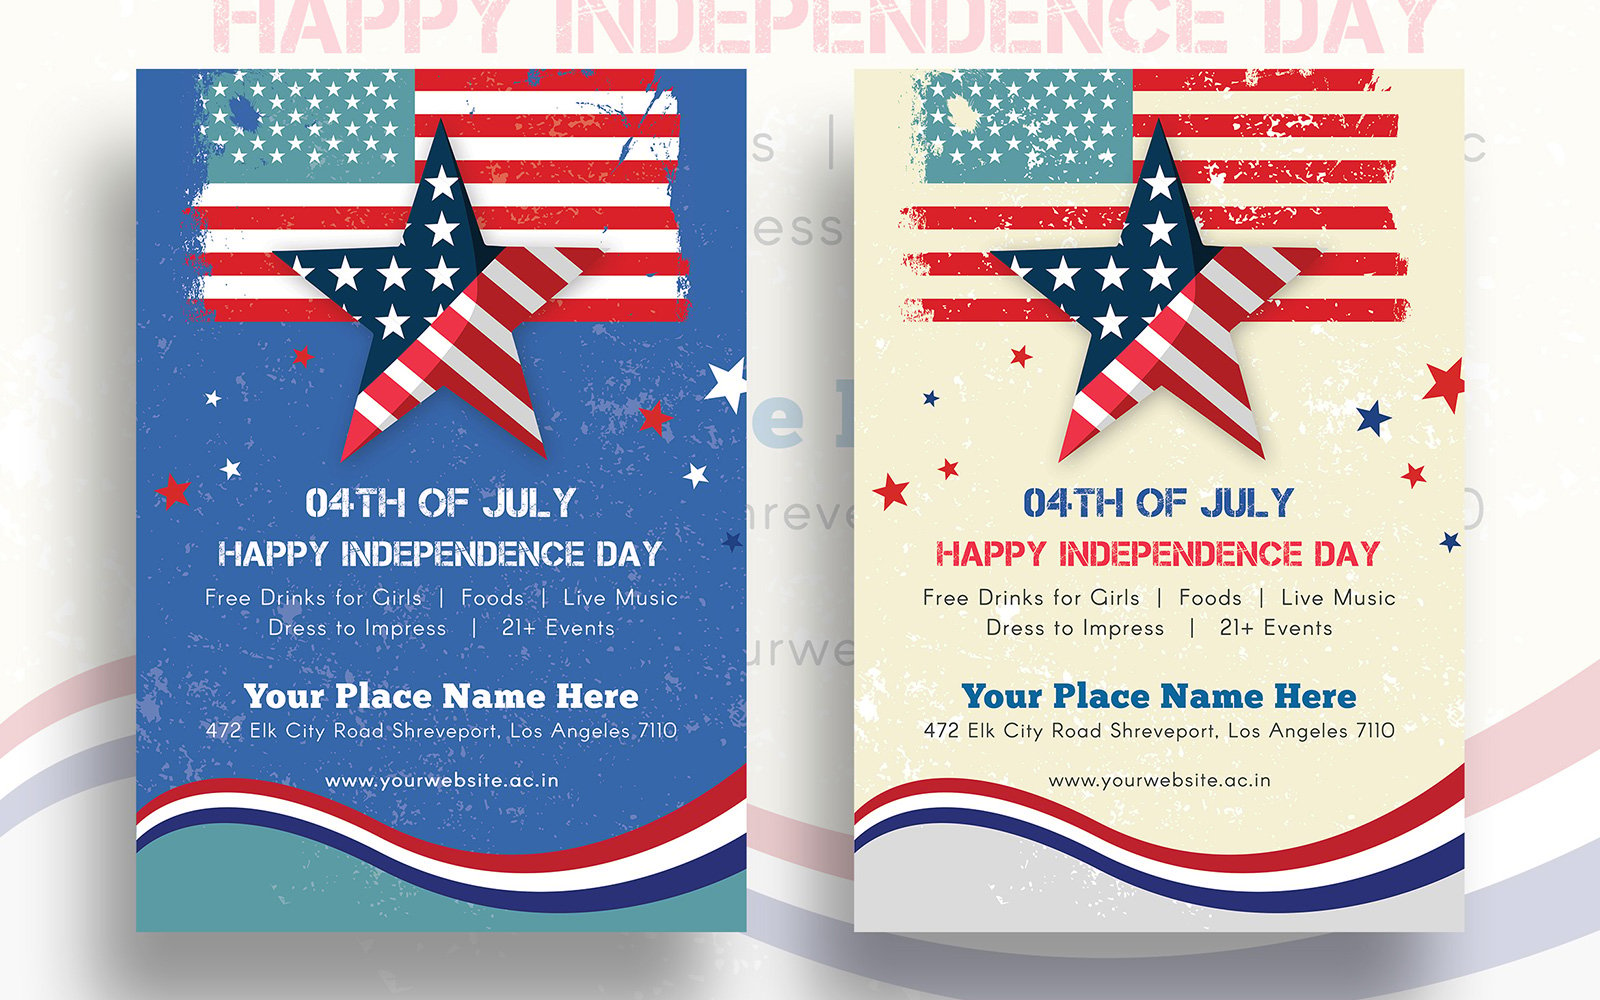  Independence Day Flyer Design - Stars and Stripes Blue and Red Design